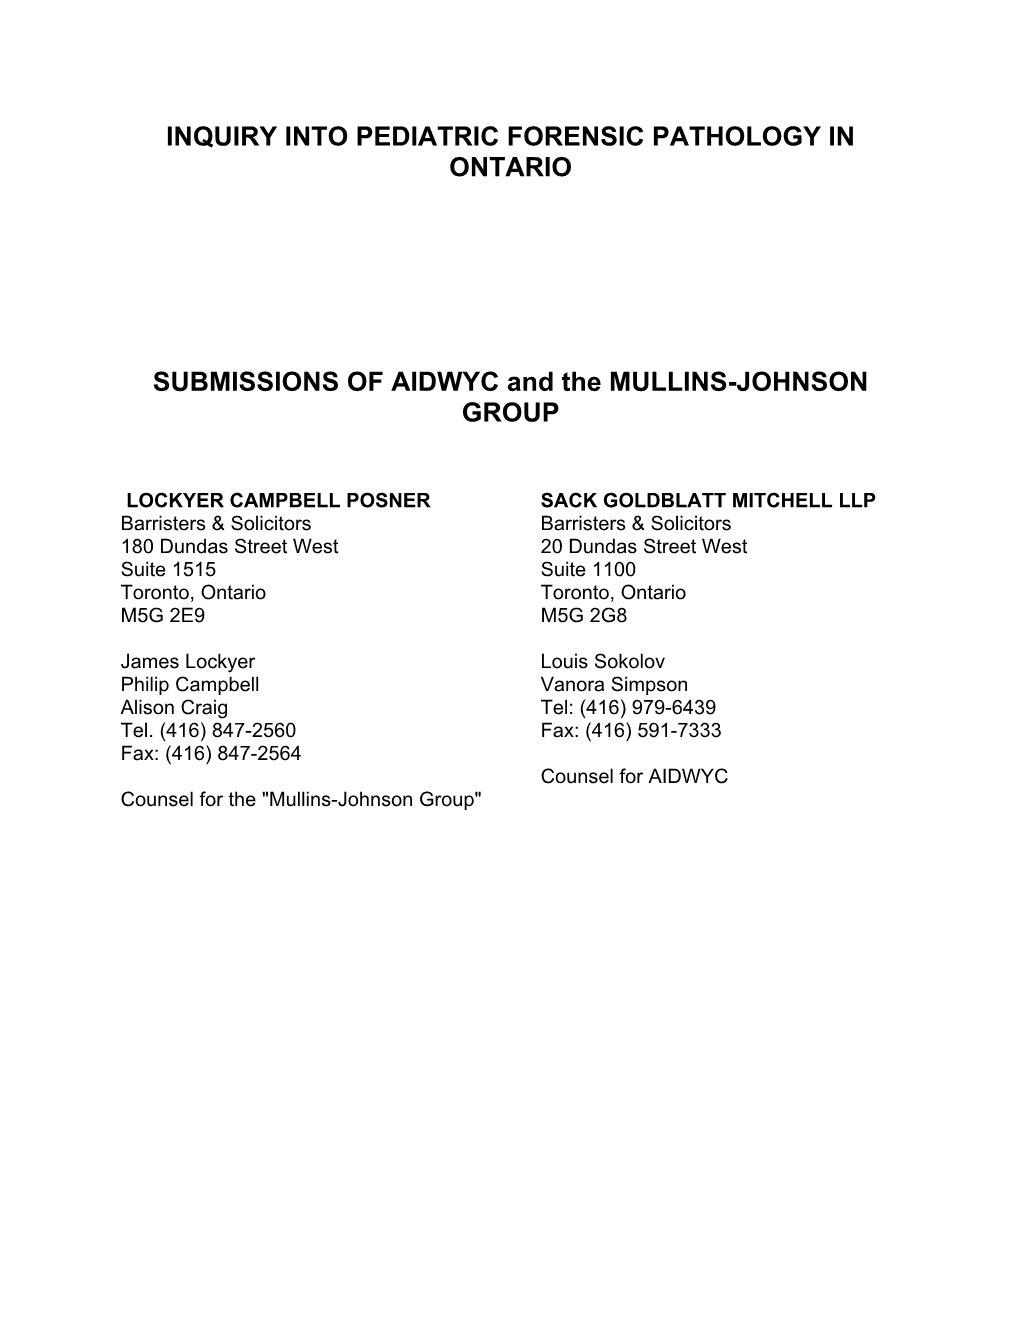 SUBMISSIONS of AIDWYC and the MULLINS-JOHNSON GROUP